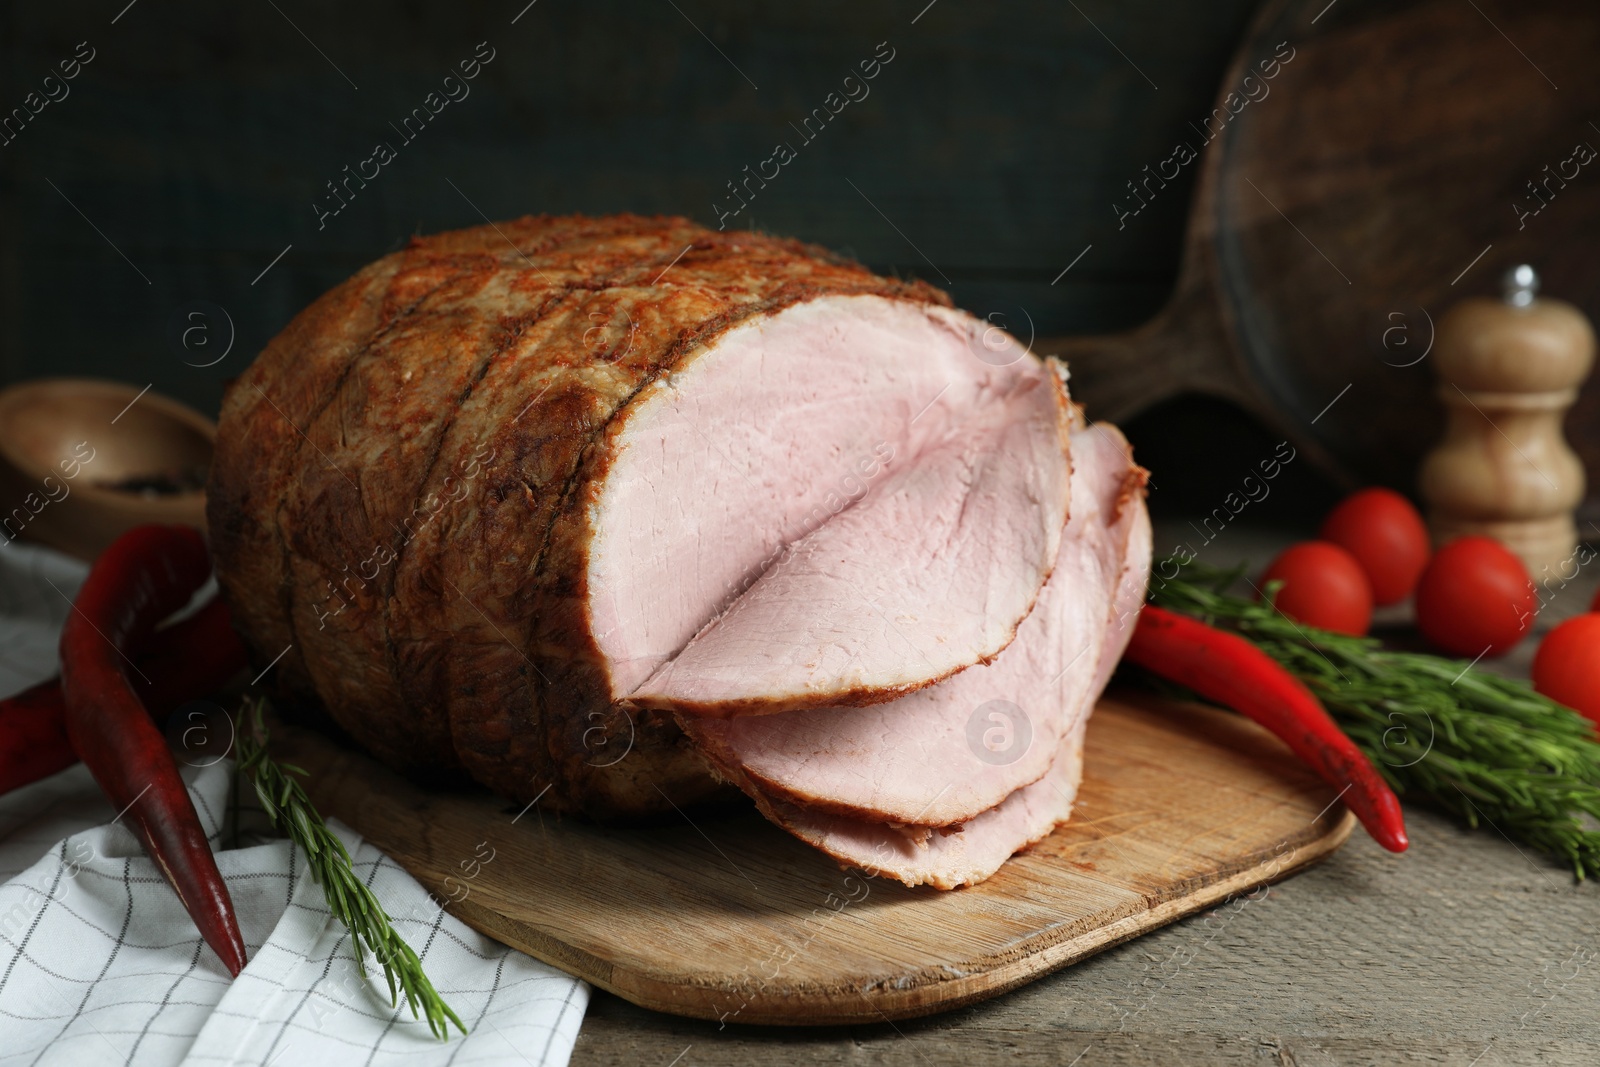 Photo of Delicious baked ham, tomatoes, chili peppers and rosemary on grey wooden table